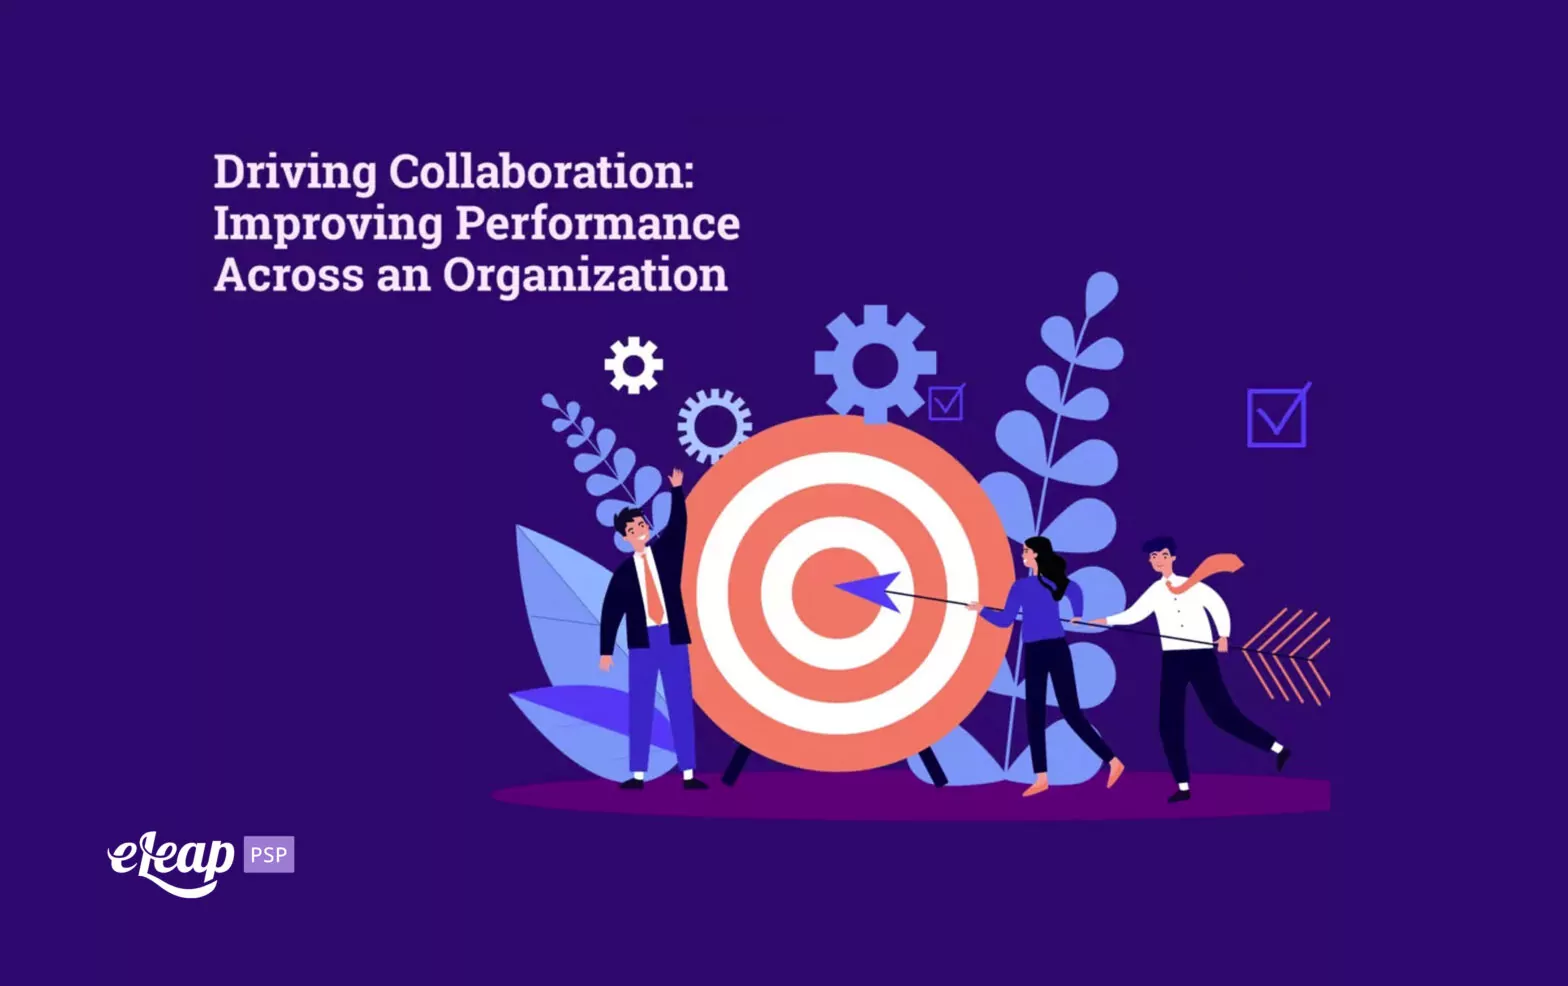 Driving Collaboration: Improving Performance Across an Organization